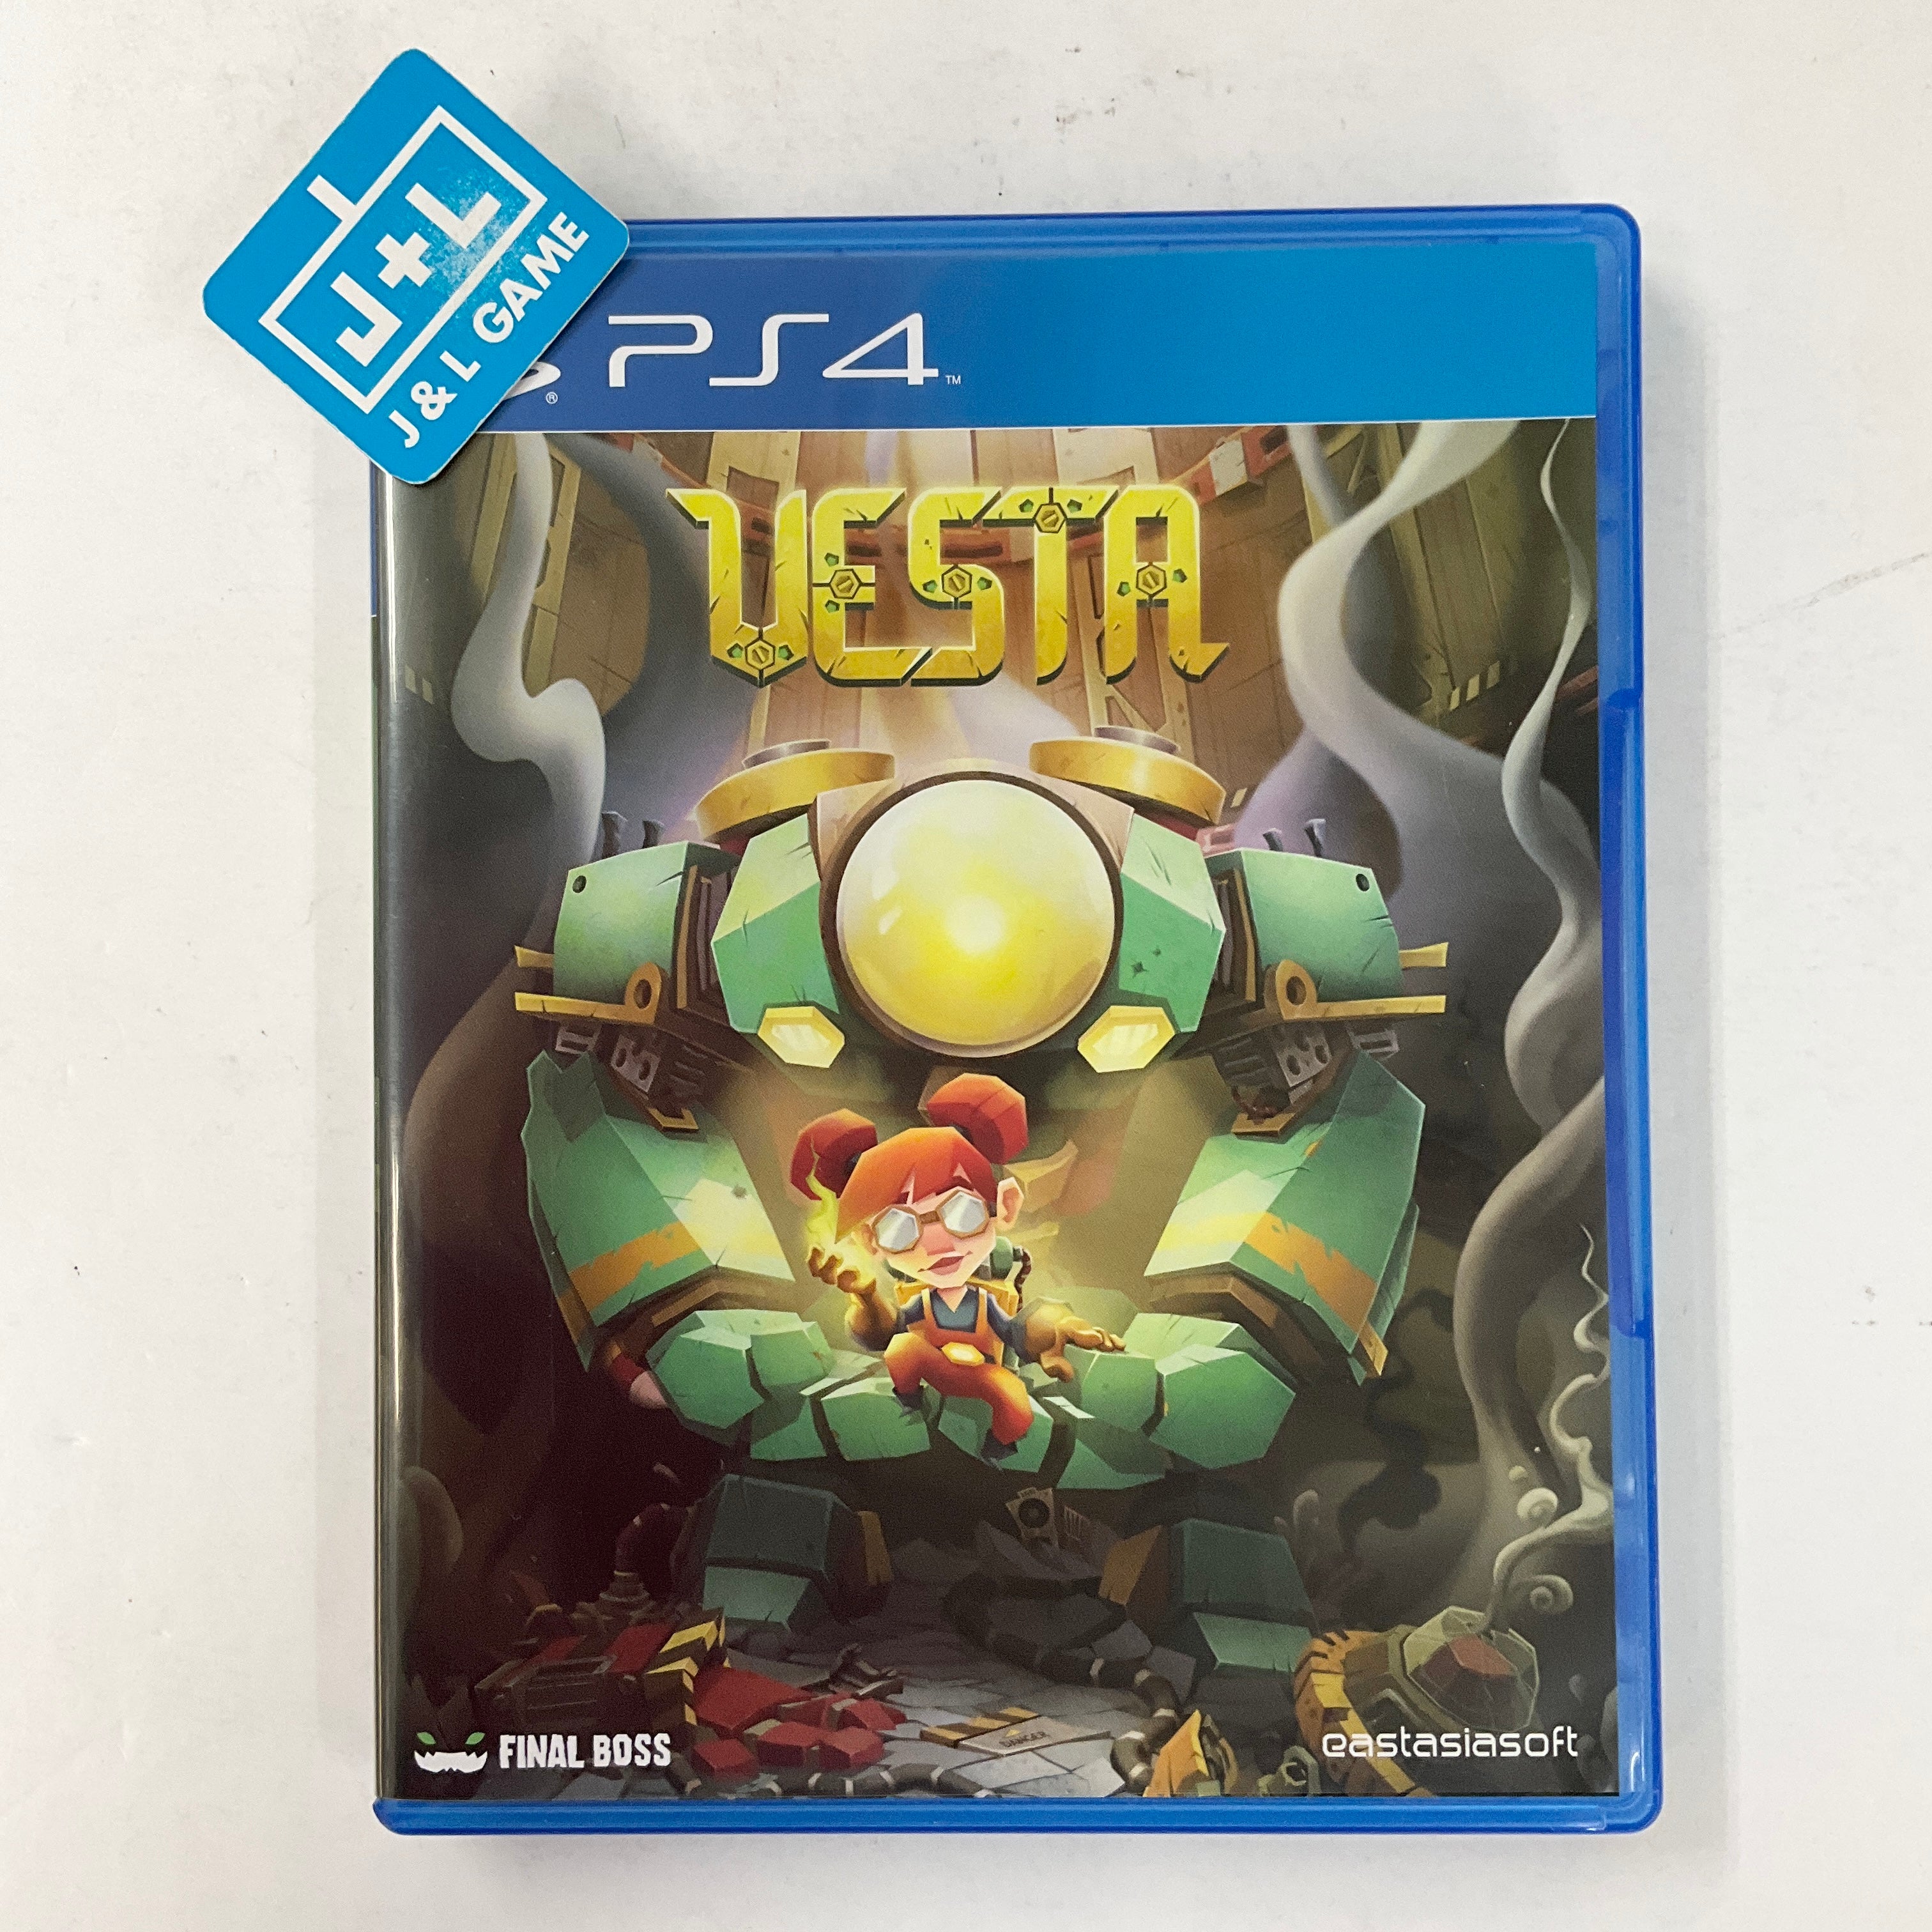 Vesta (Limited Edition) (English Subtitle) - (PS4) Playstation 4 (Asia Import) Video Games eastasiasoft   